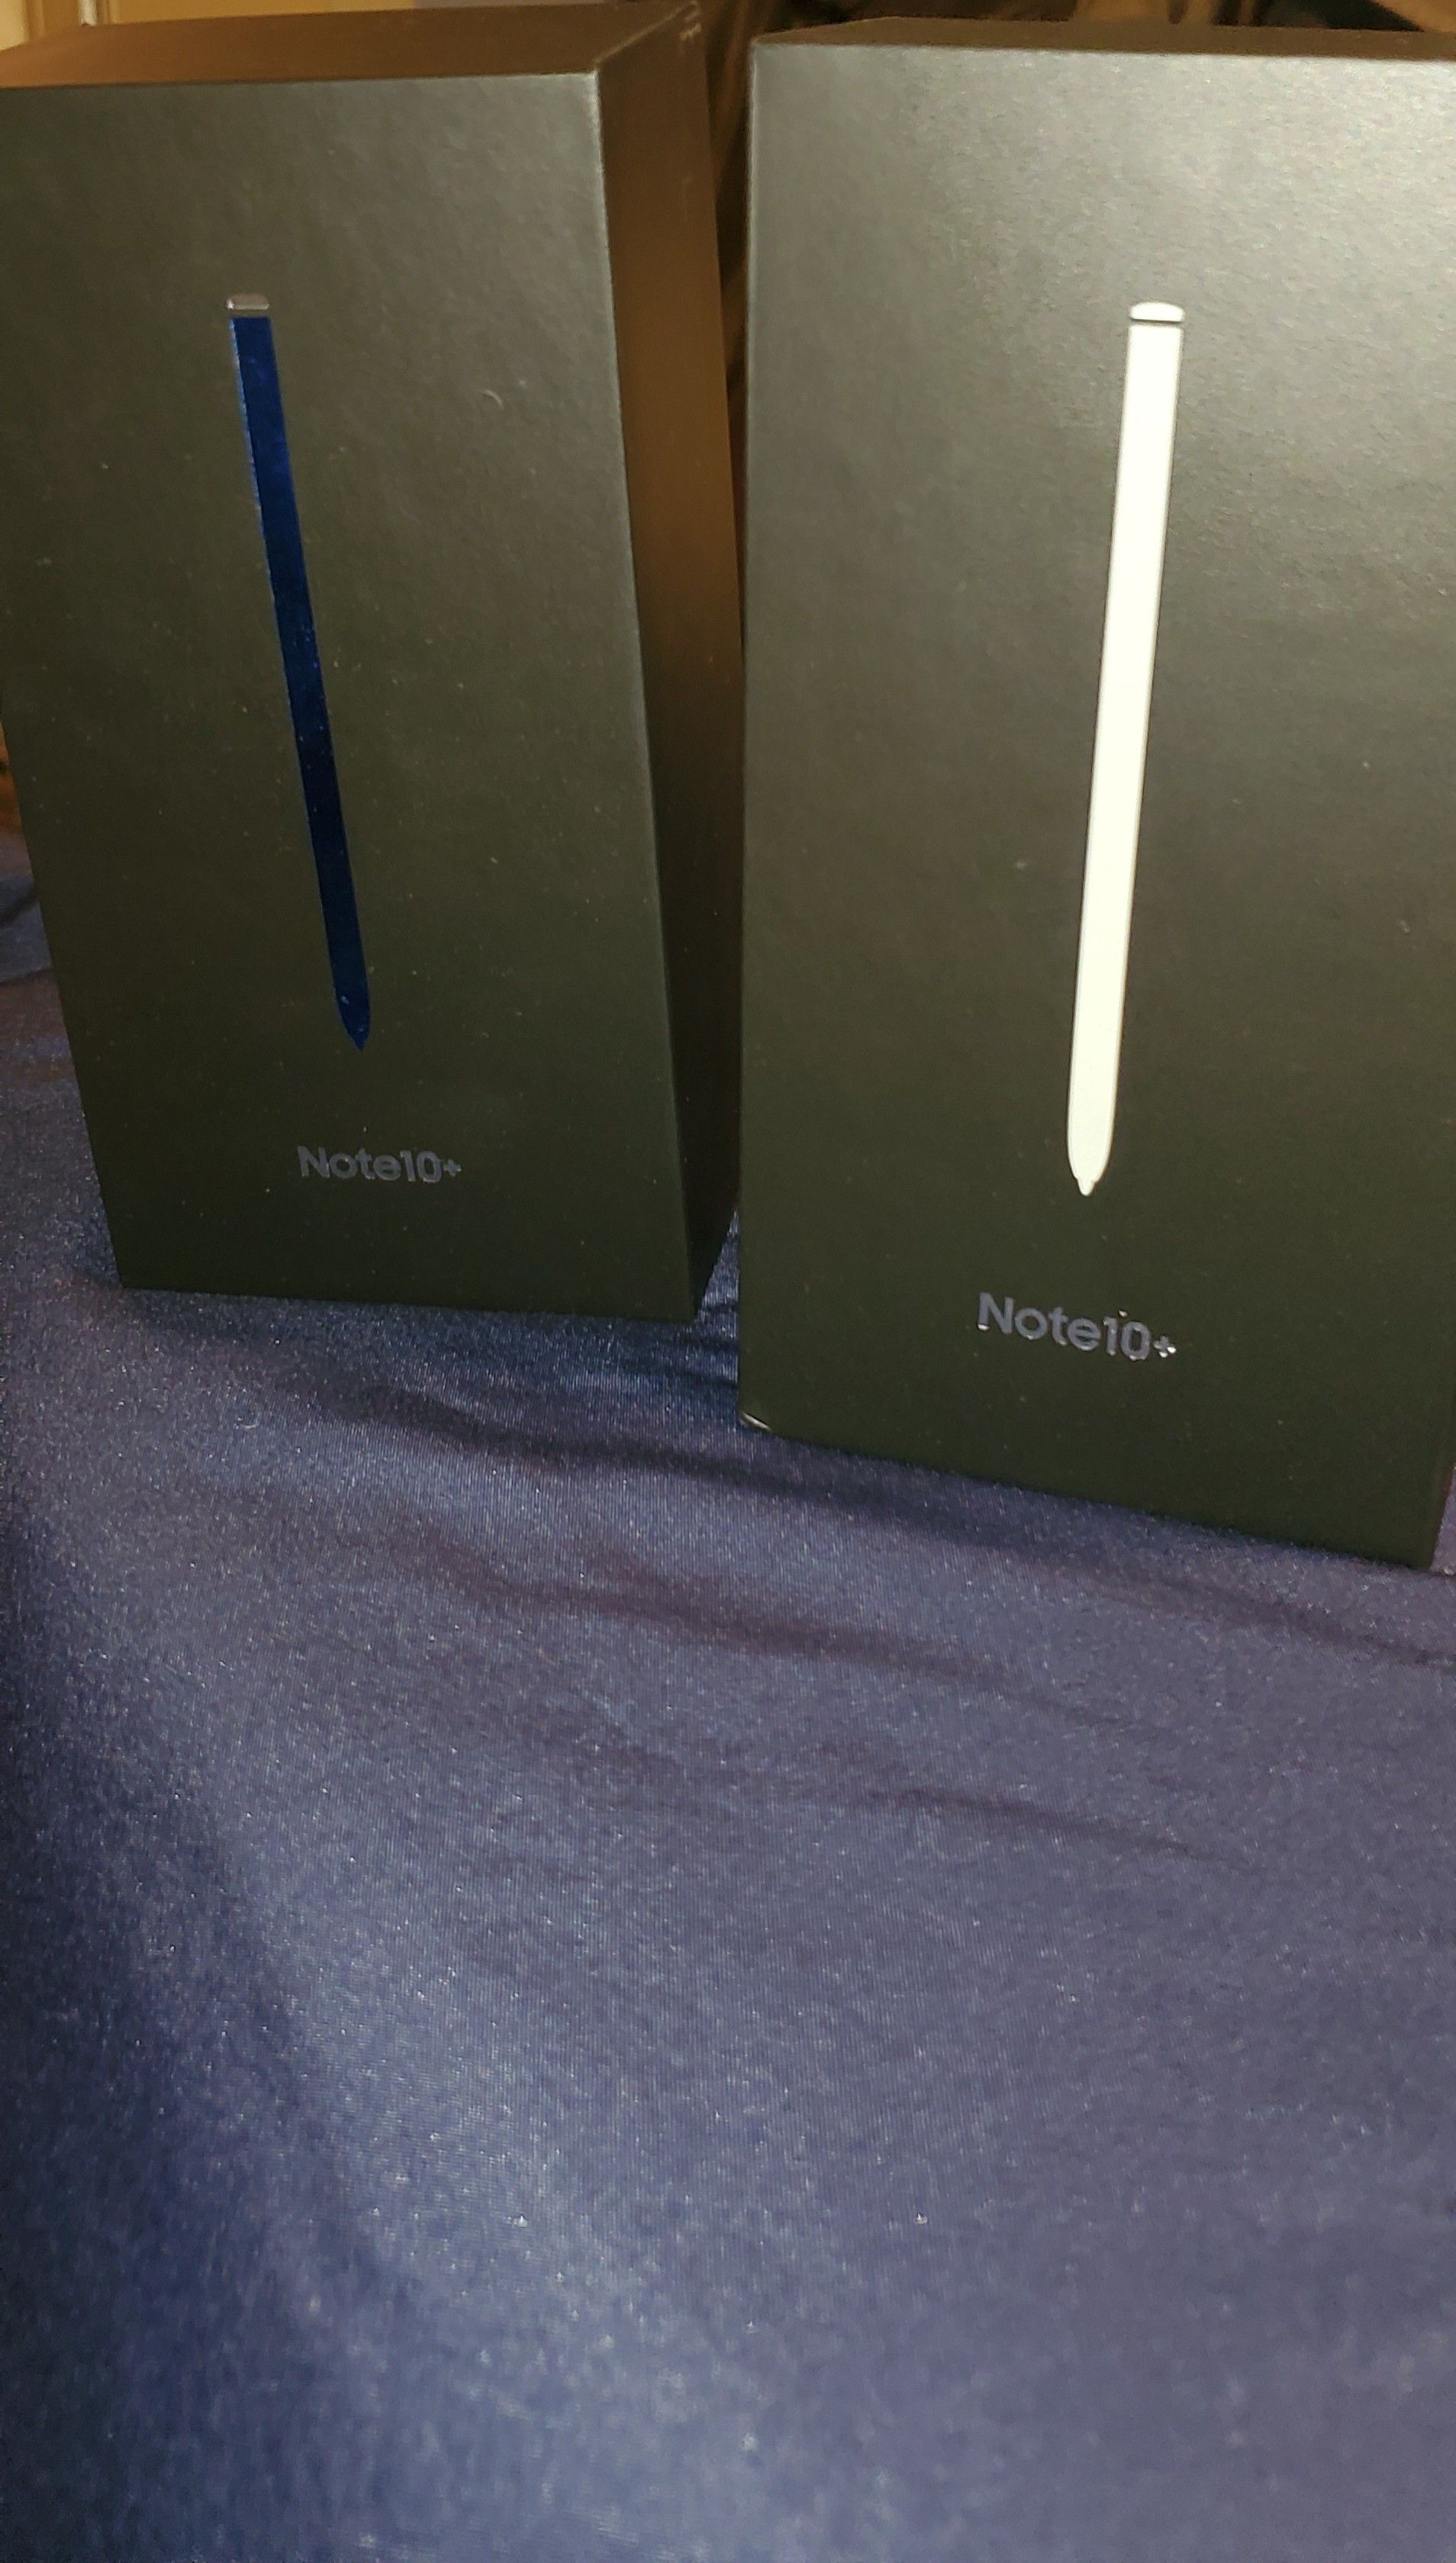 SAMSUNG GALAXY NOTE 10 + FULLY UNLOCKED DIRECTLY FROM SAMSUNG USE ON ANY CARRIER COLOR:WHITE AND BLUE IN STOCK. SEALED BOX NEVER OPENED